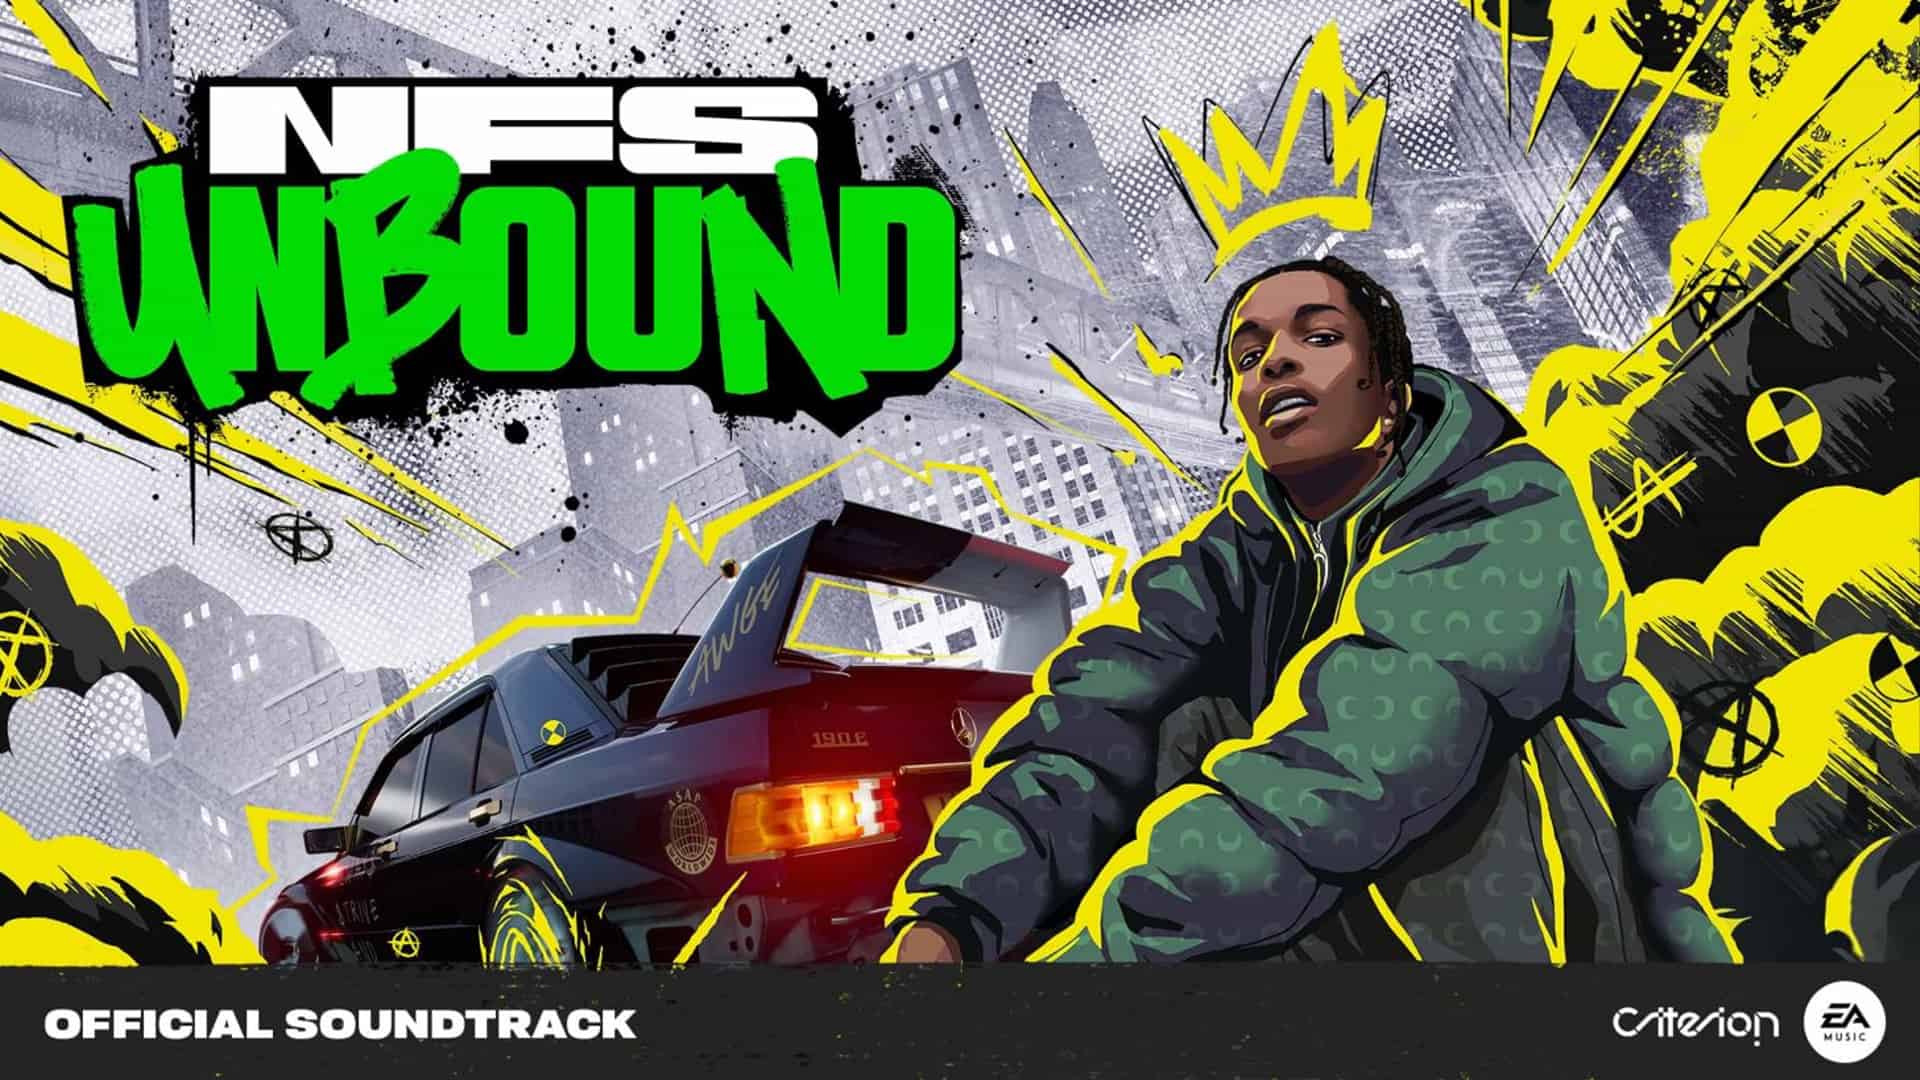 Need for Speed Unbound's gigantic soundtrack features A$AP Rocky, Brodinski and more